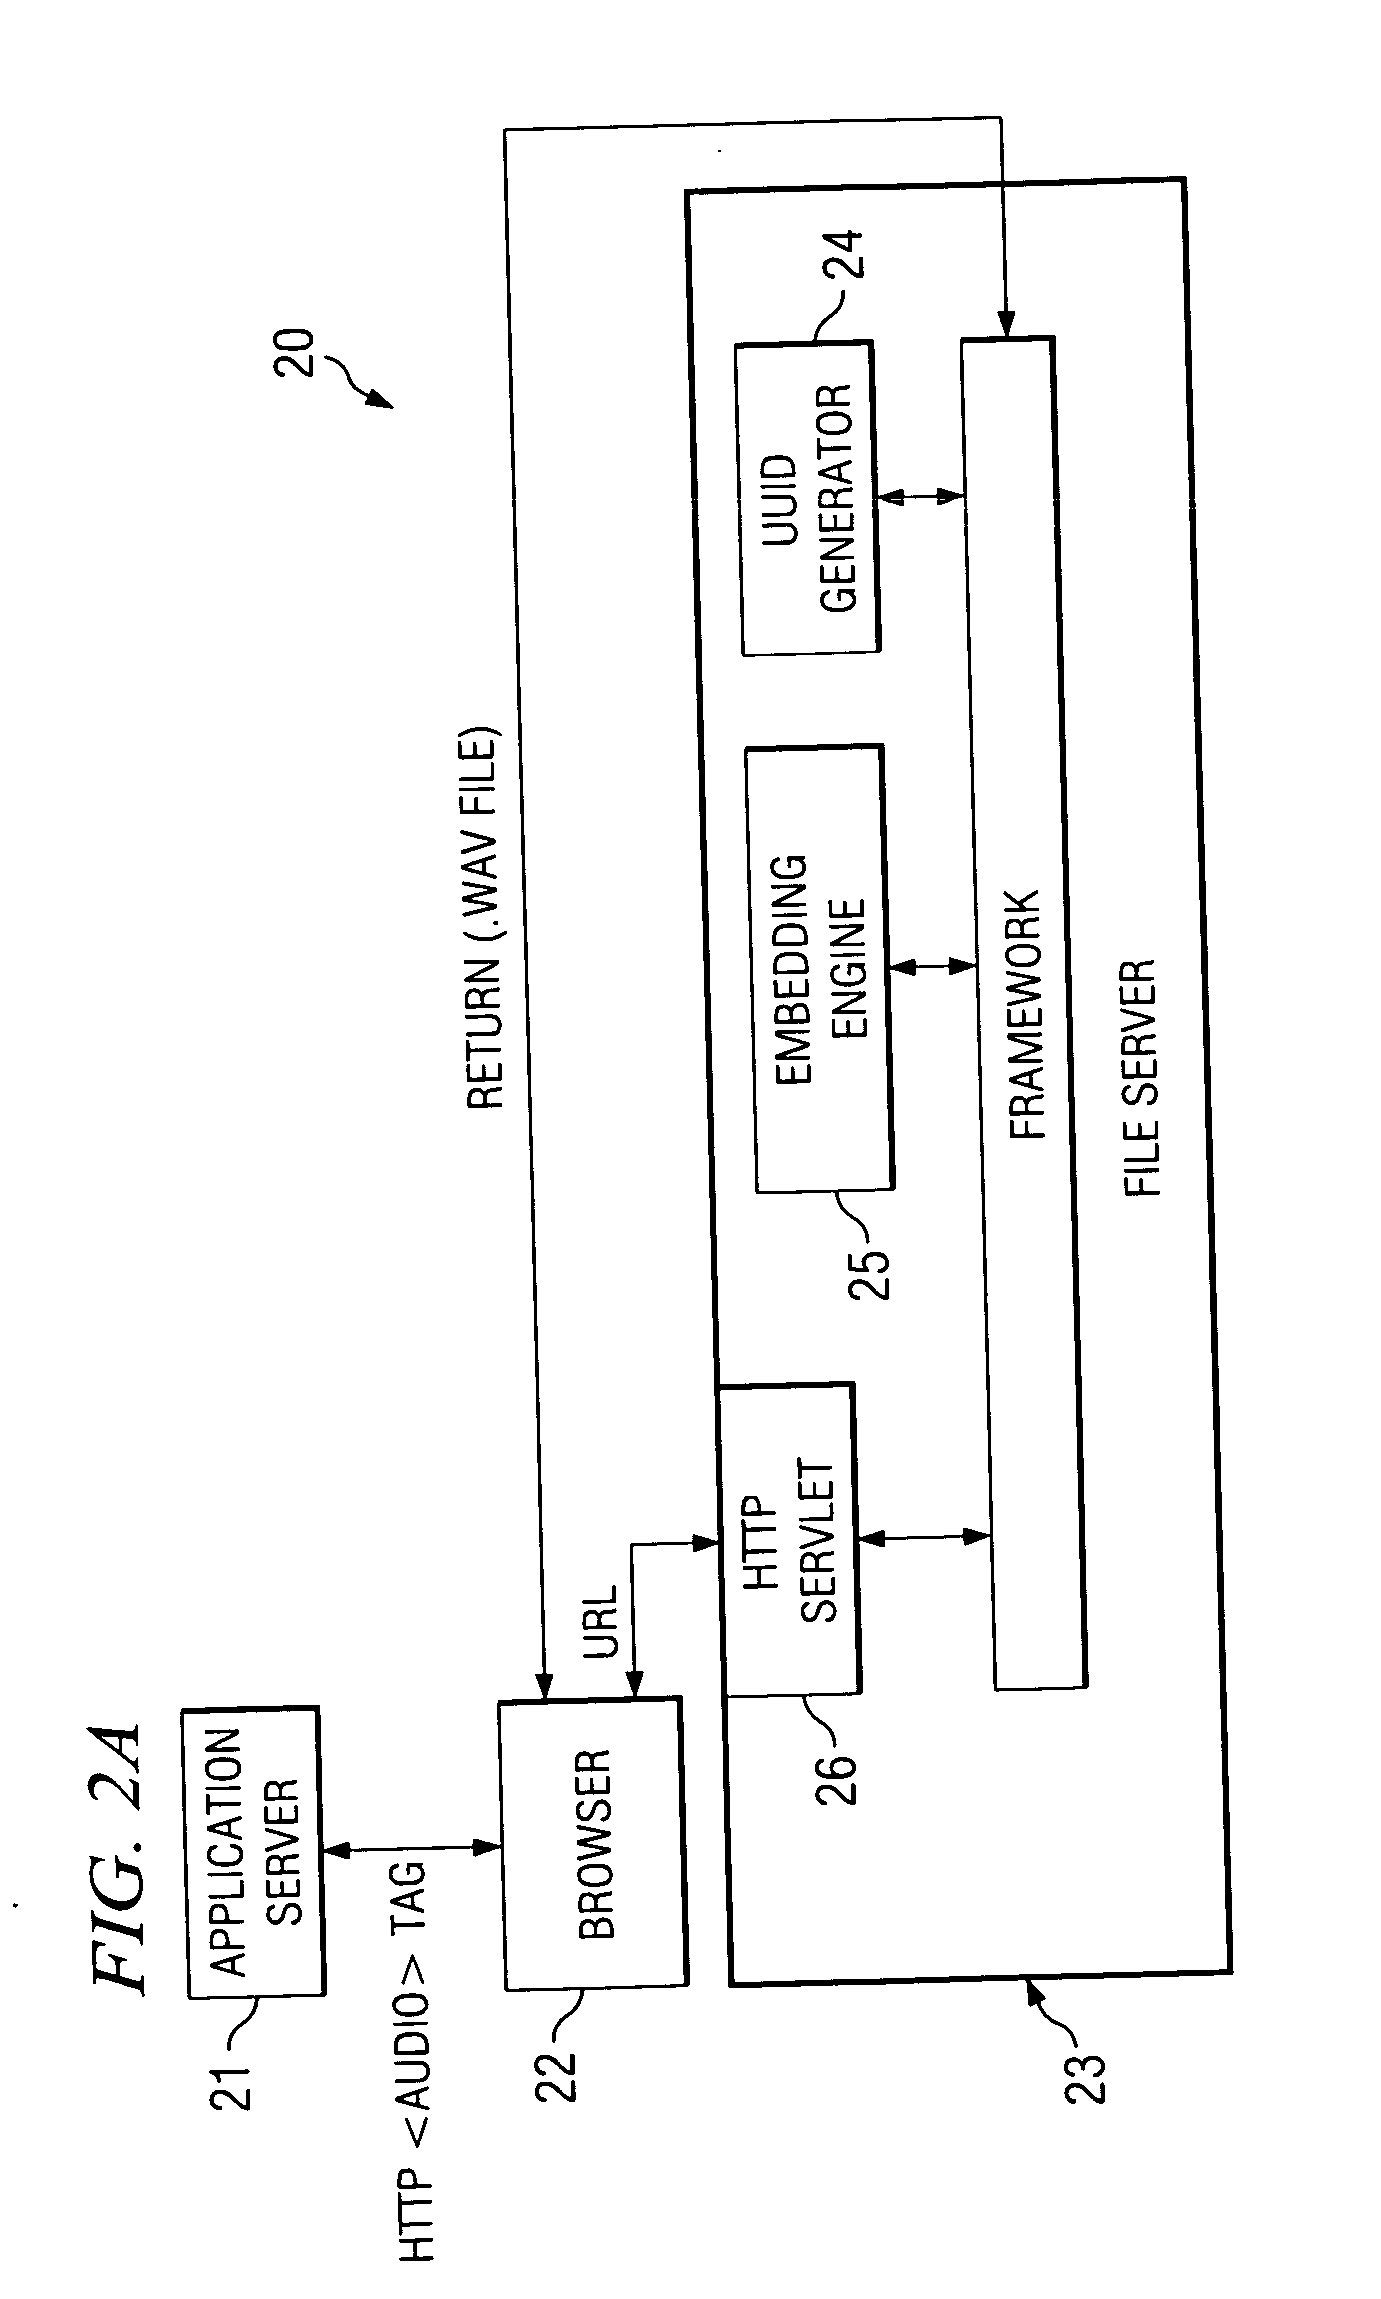 System and method for defining and inserting metadata attributes in files